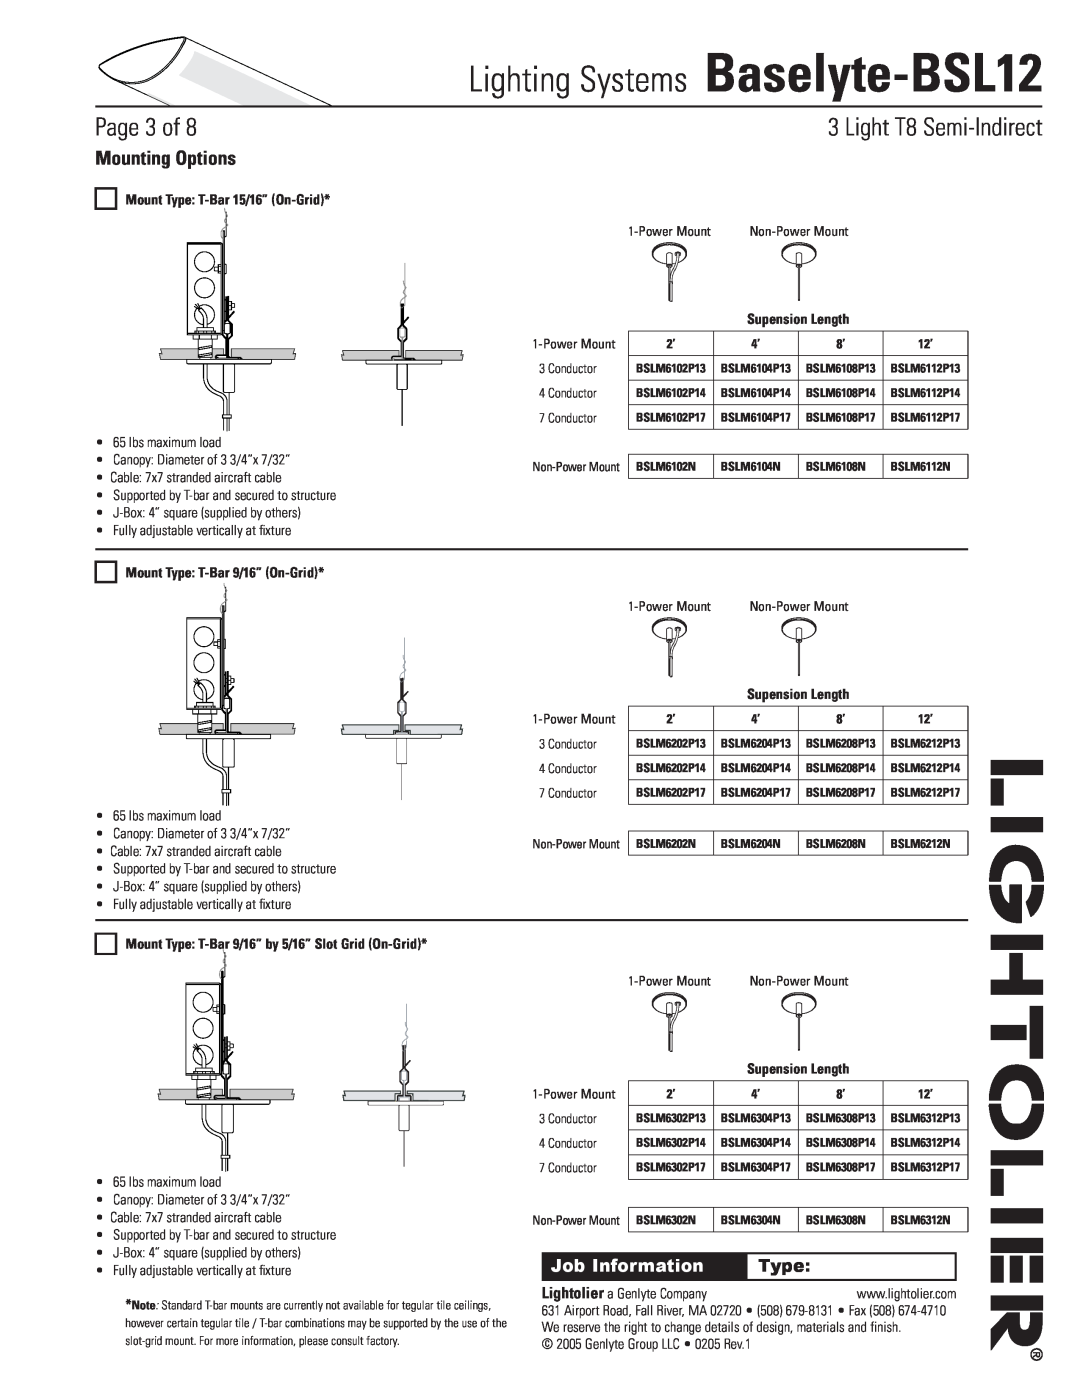 Lightolier Baselyte-BSL12 Mounting Options, Mount Type T-Bar15/16” On-Grid, Supension Length, Page of, Job Information 